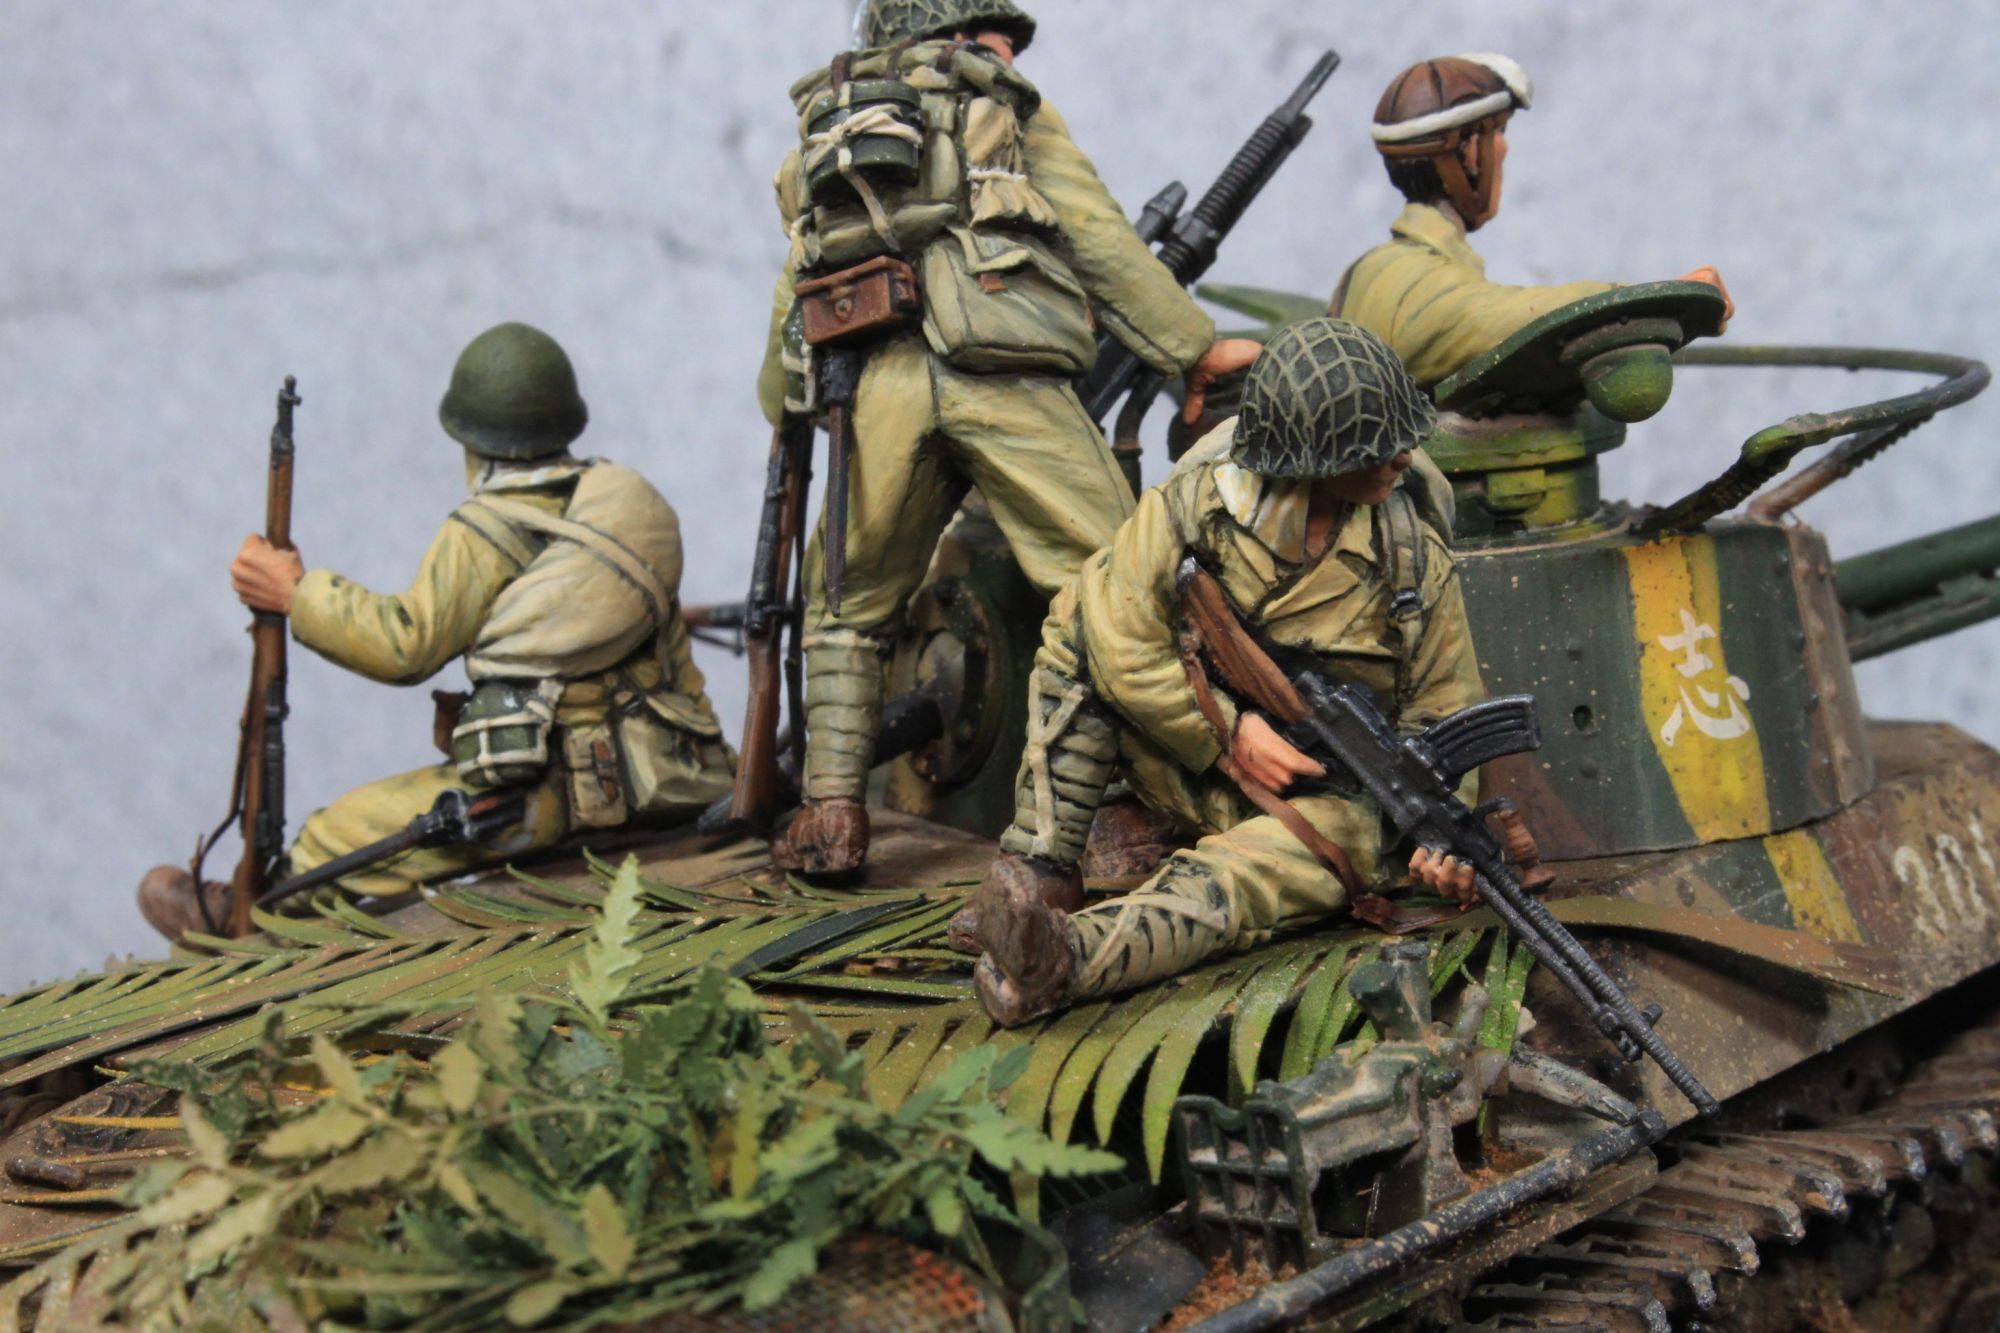 Paracel Miniatures[BWW3506]1/35 WWII 日本帝国陸軍 戦車跨乗兵ビッグセット